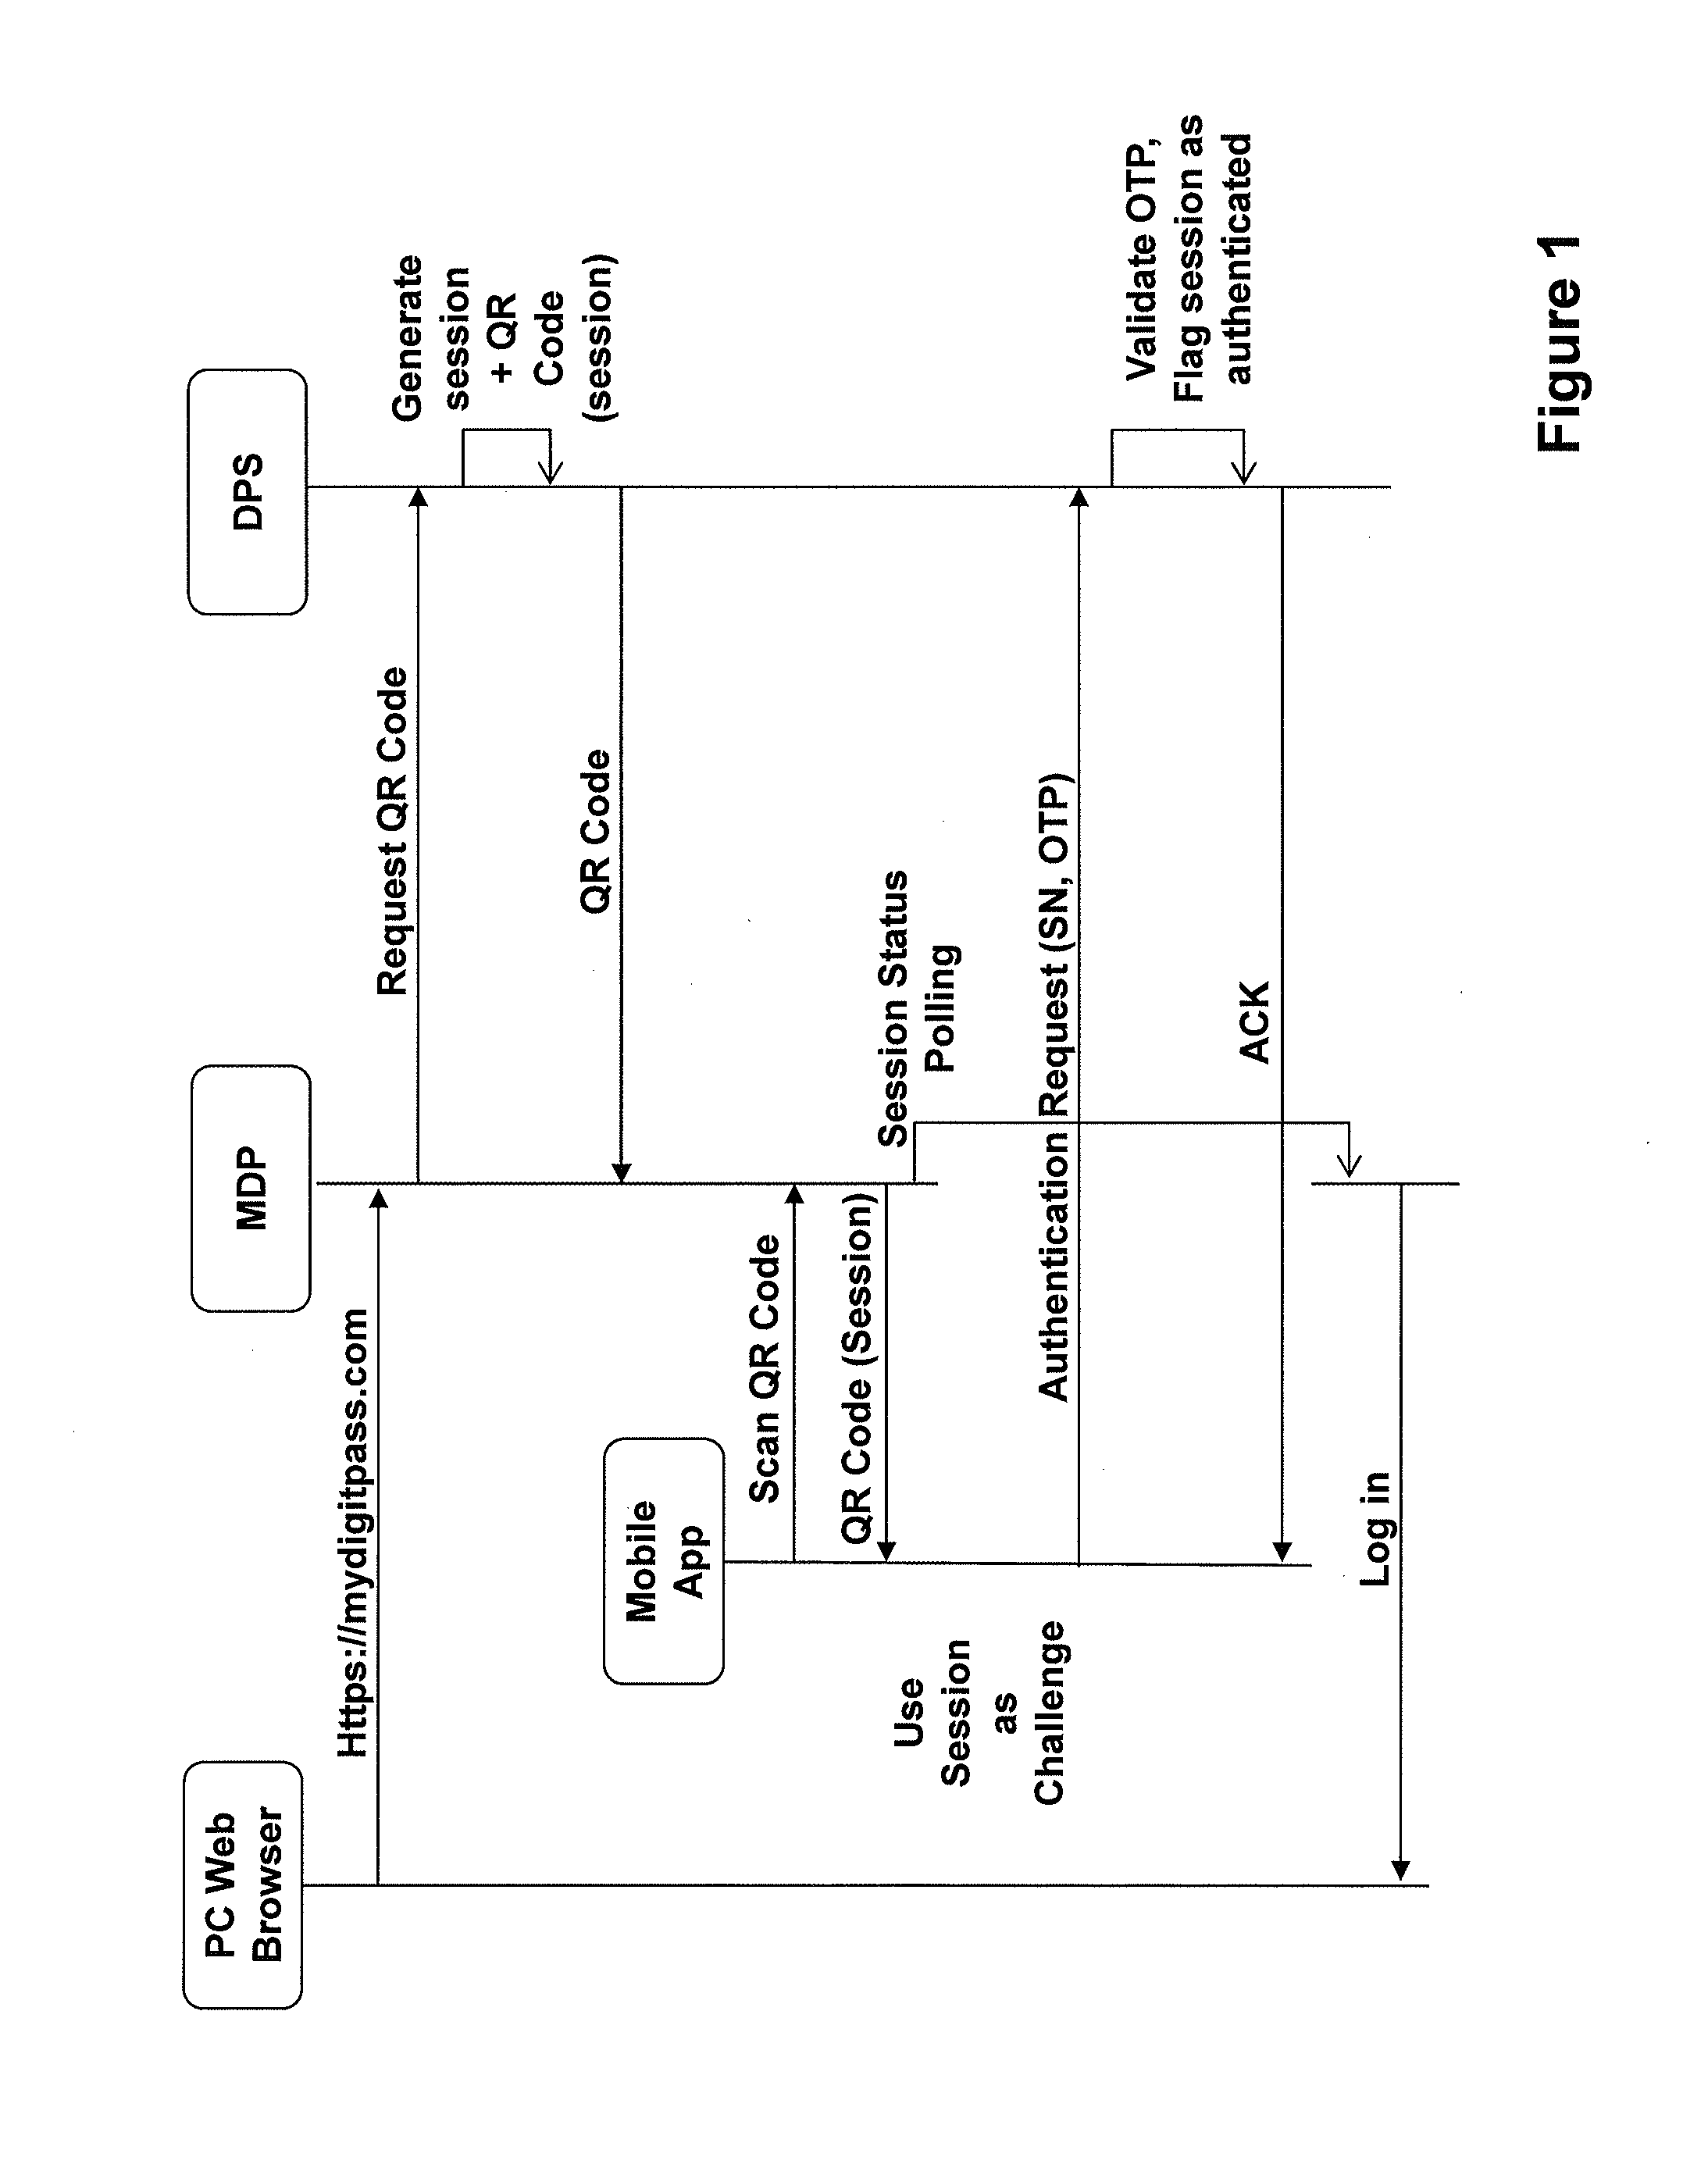 User-convenient authentication method and apparatus using a mobile authentication application